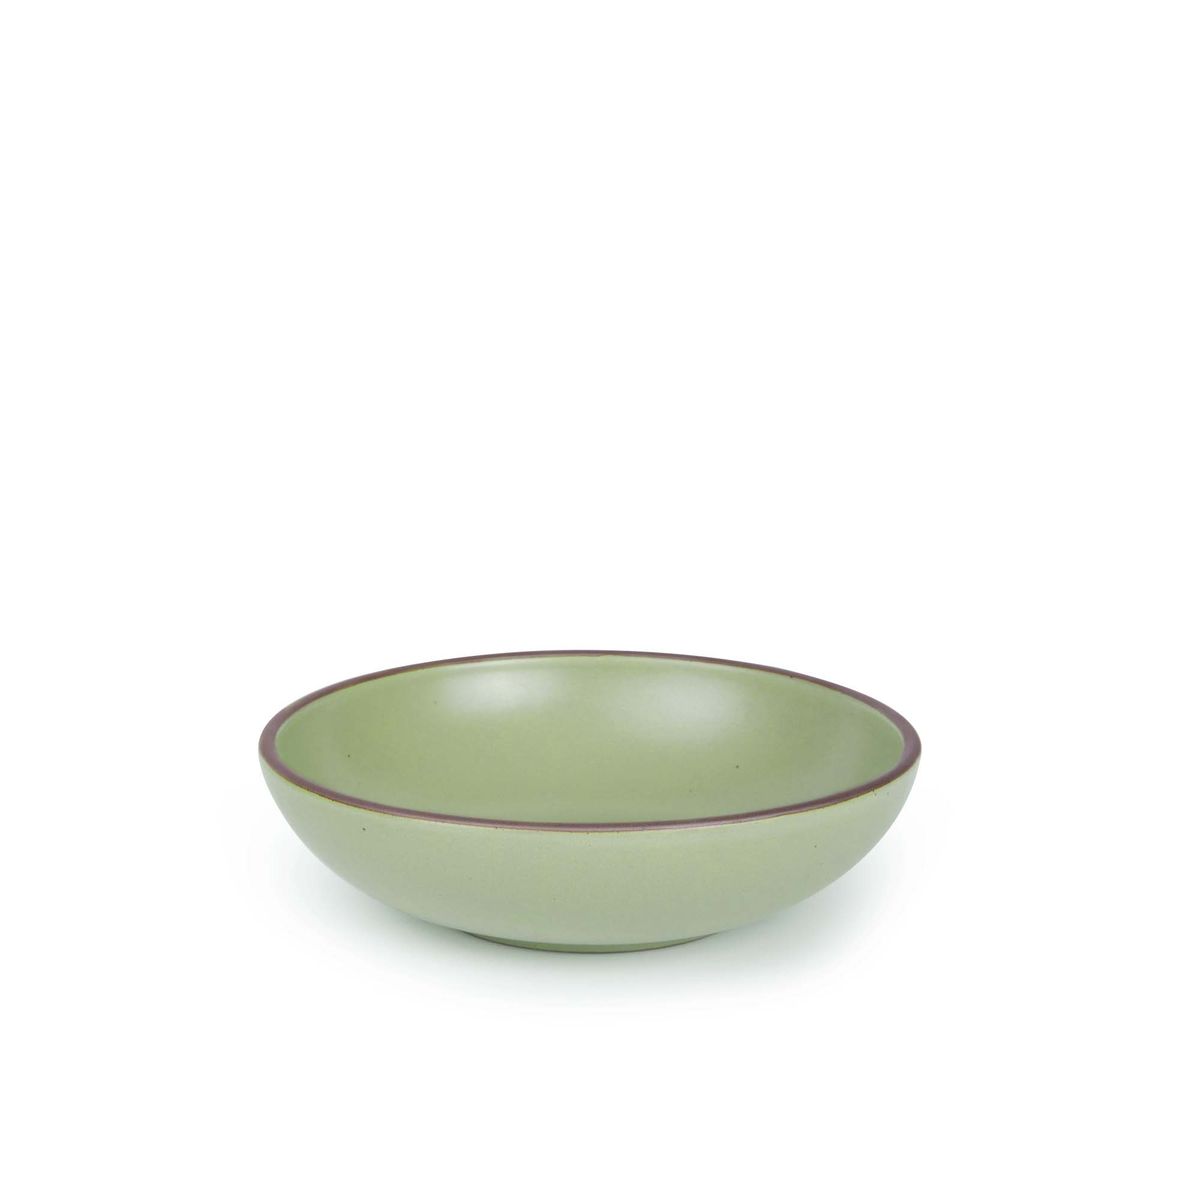 A dinner-sized shallow ceramic bowl in a calming sage green color featuring iron speckles and an unglazed rim